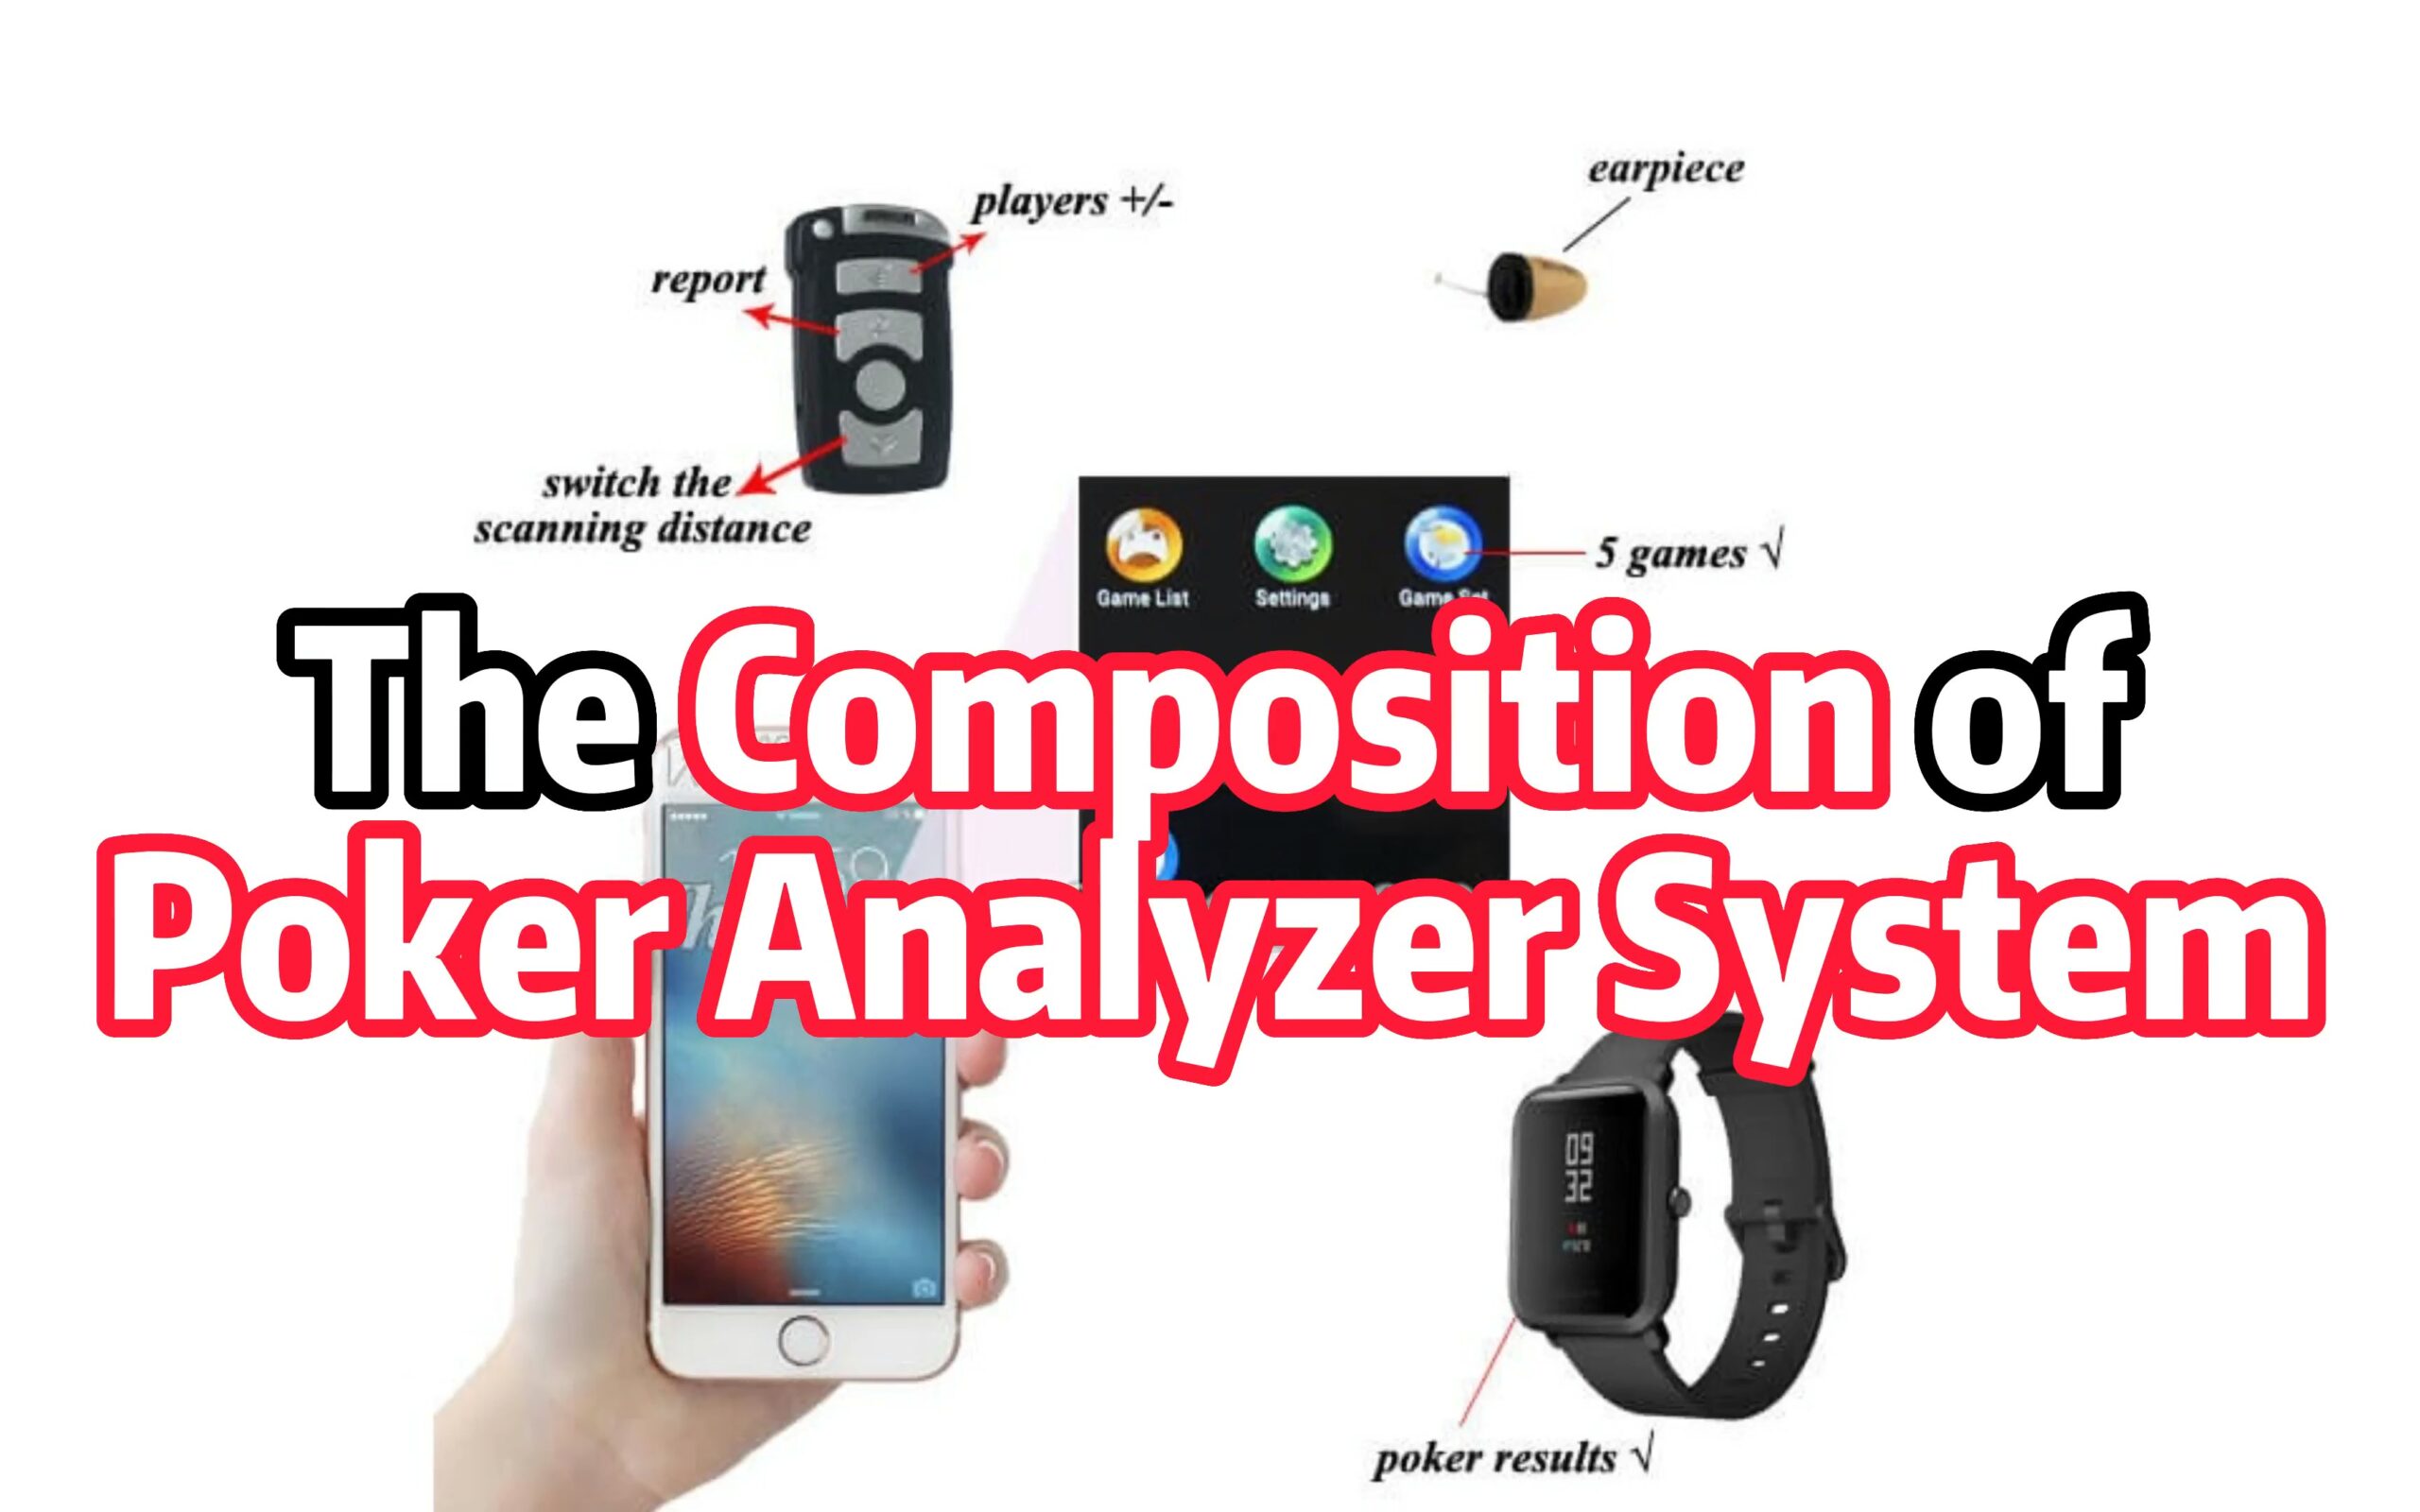 The Composition of Poker Analyzer System